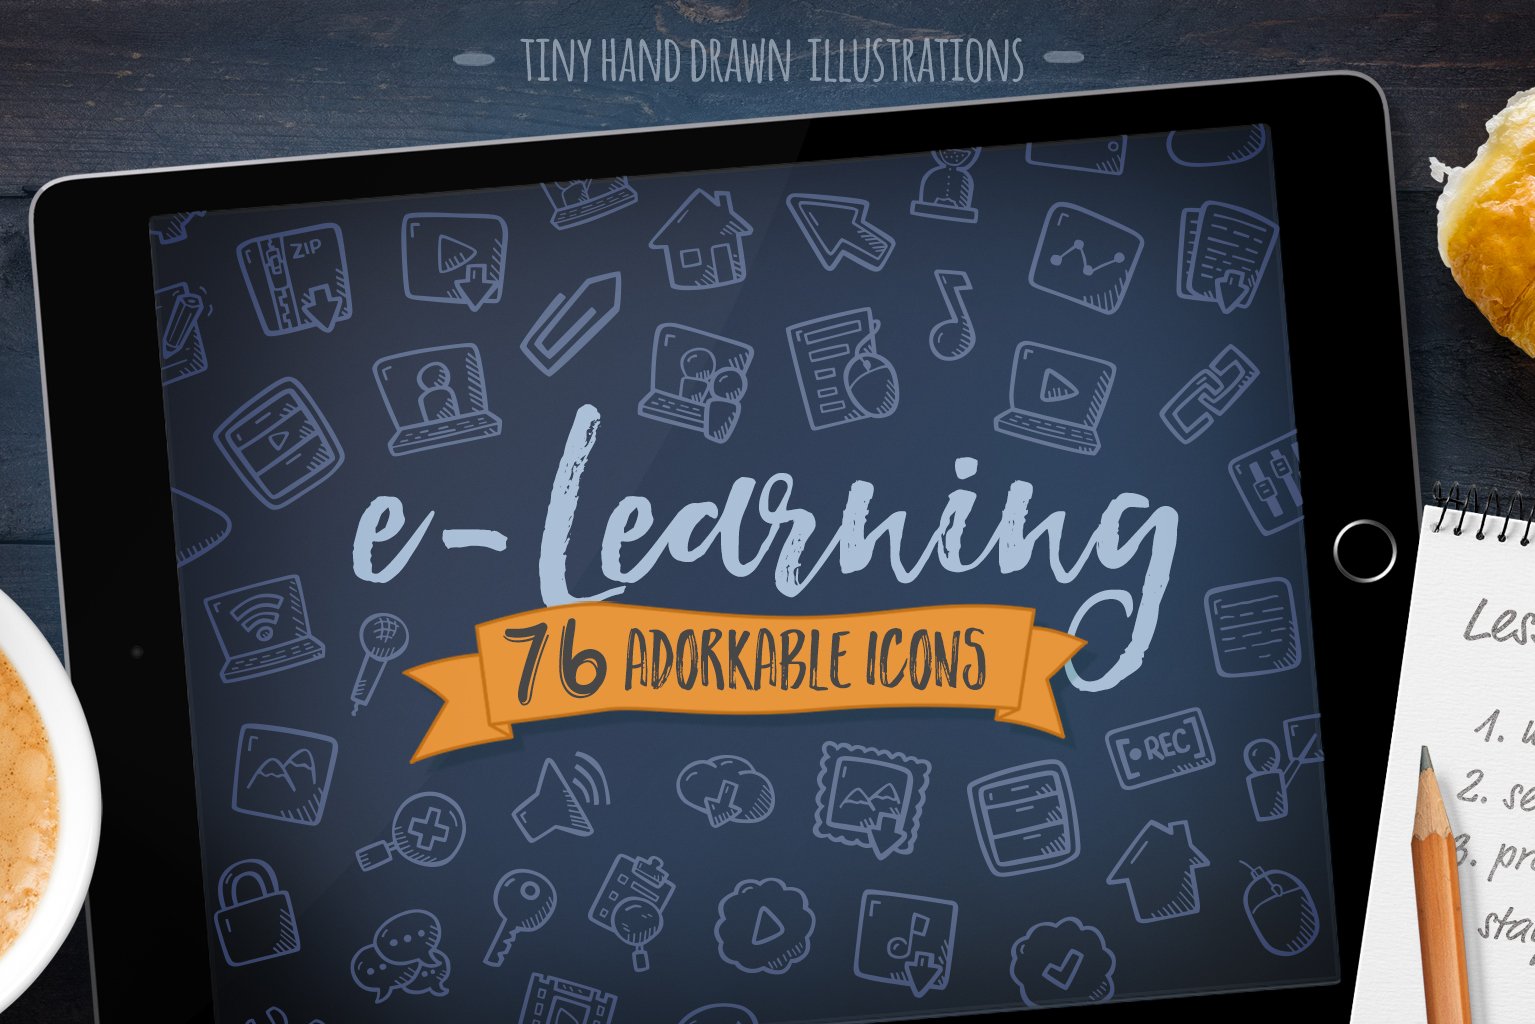 e-Learning Hand Drawn Icons cover image.